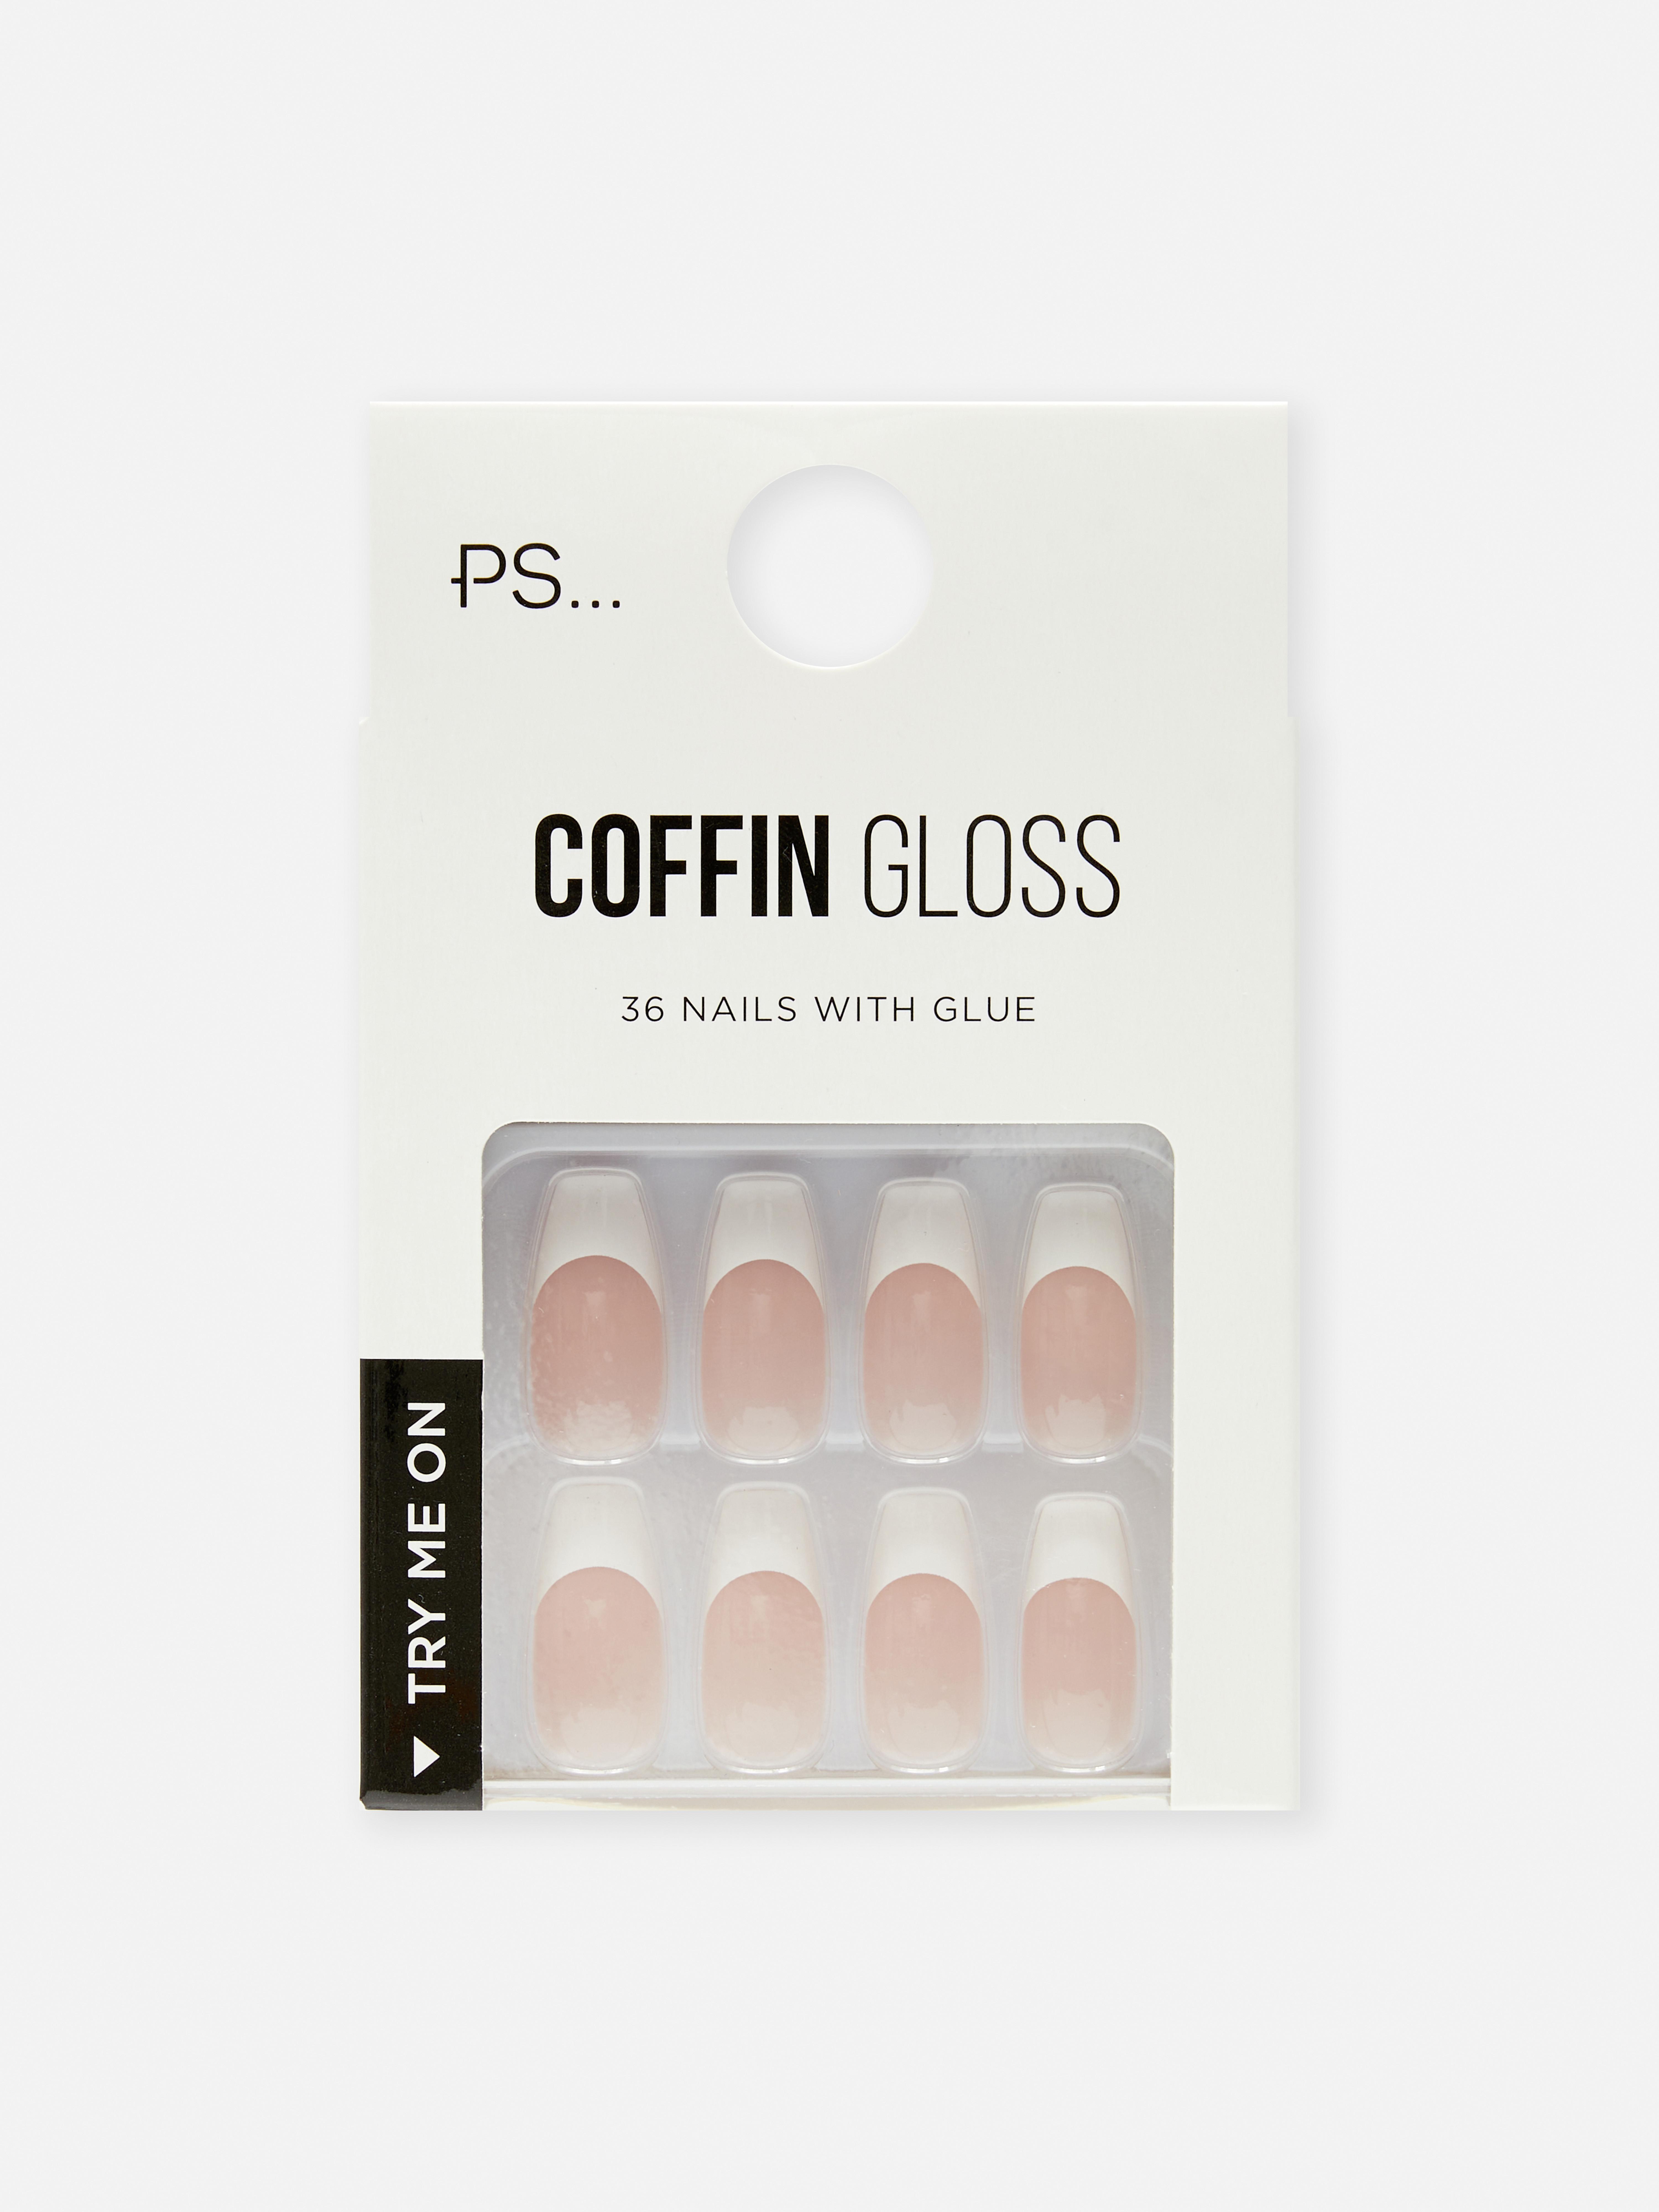 PS... Glossy Coffin-Shaped French False Nails